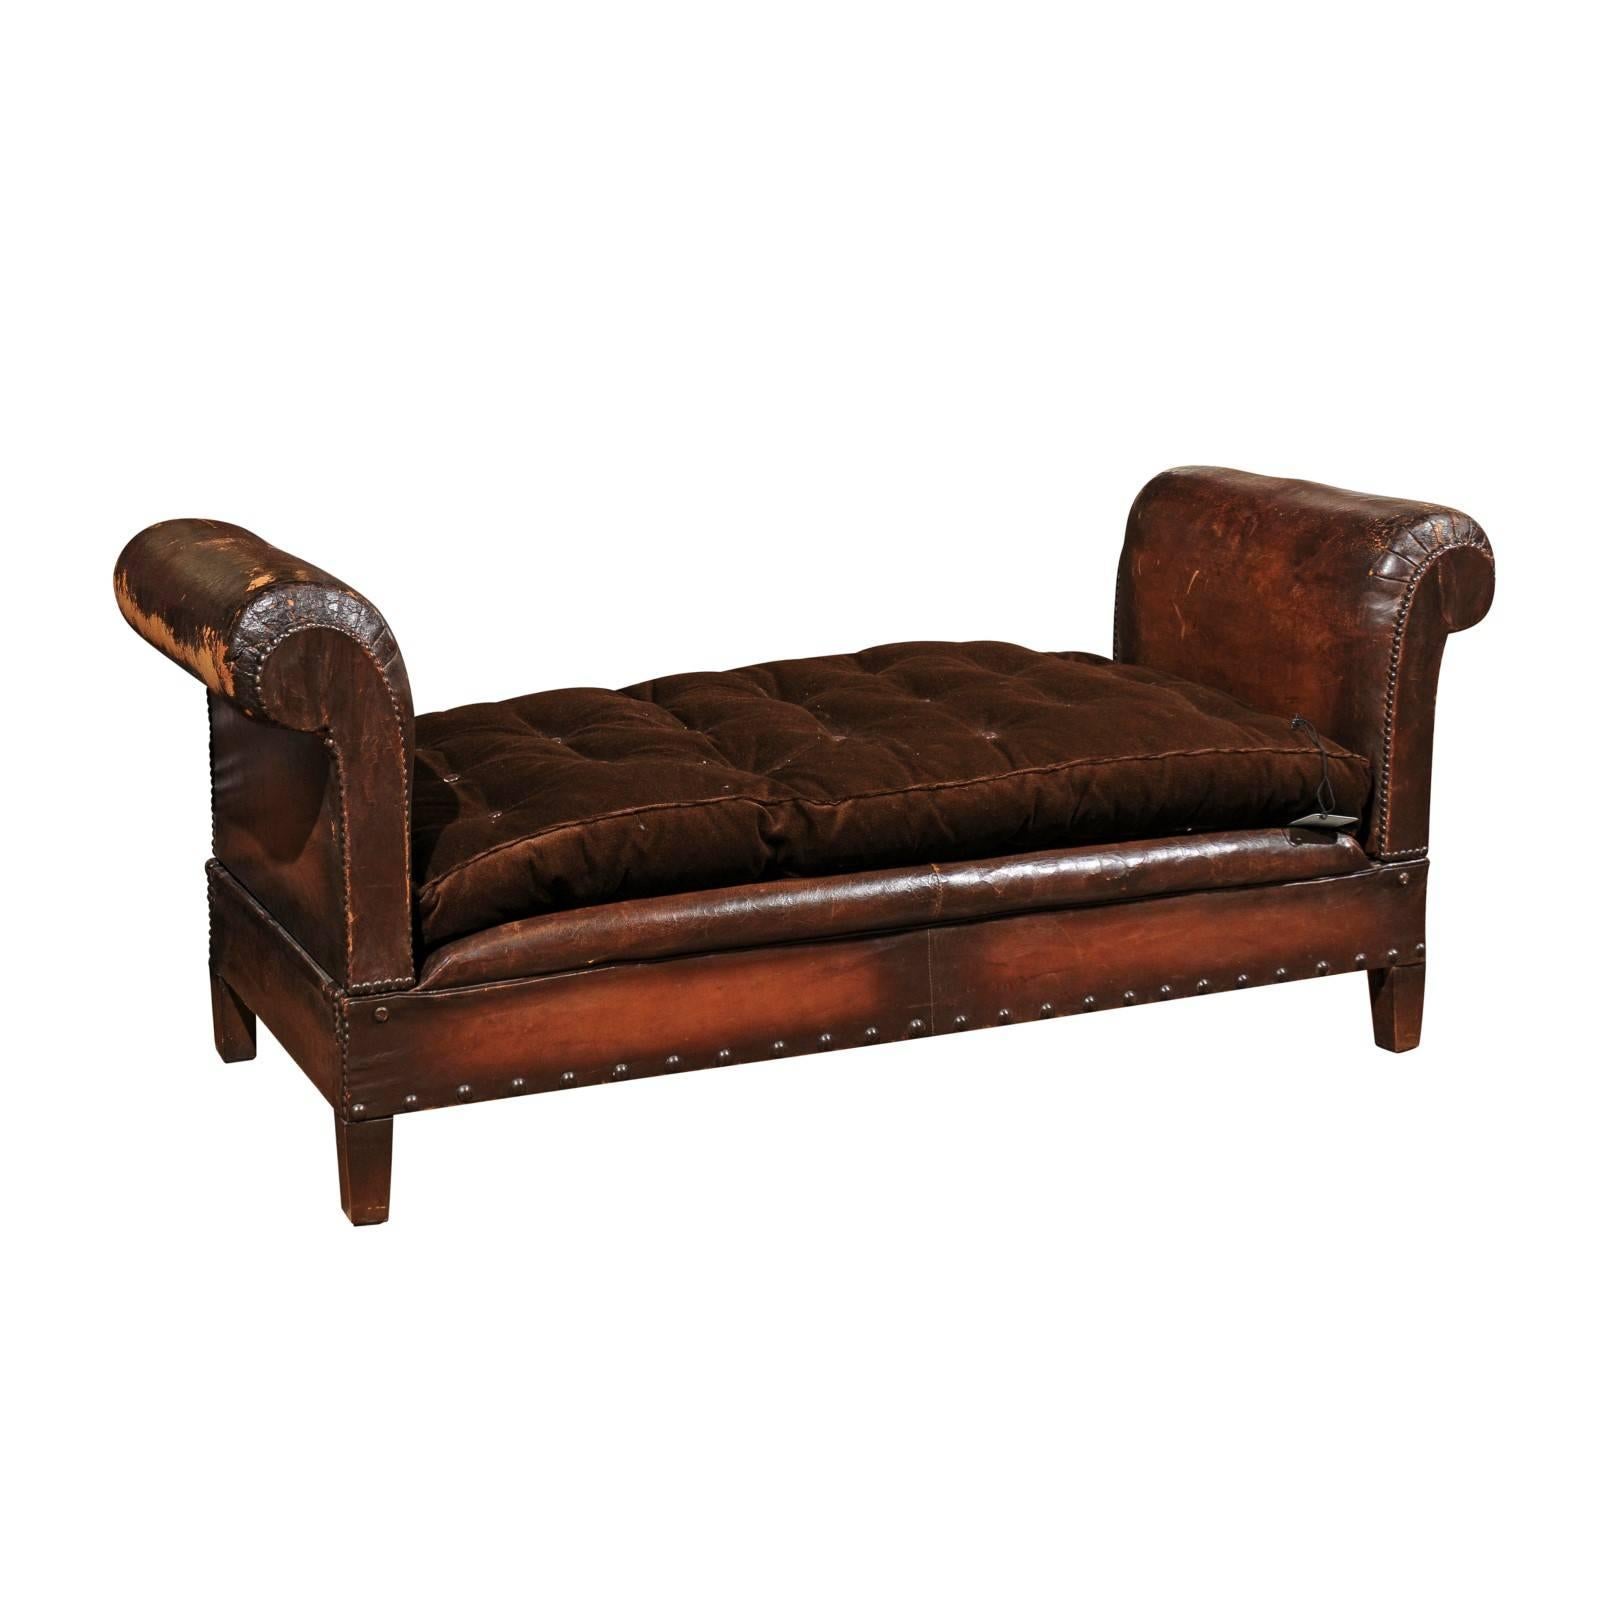 French 1900s Turn of the Century Brown Leather Backless Bench with Folding Arms For Sale